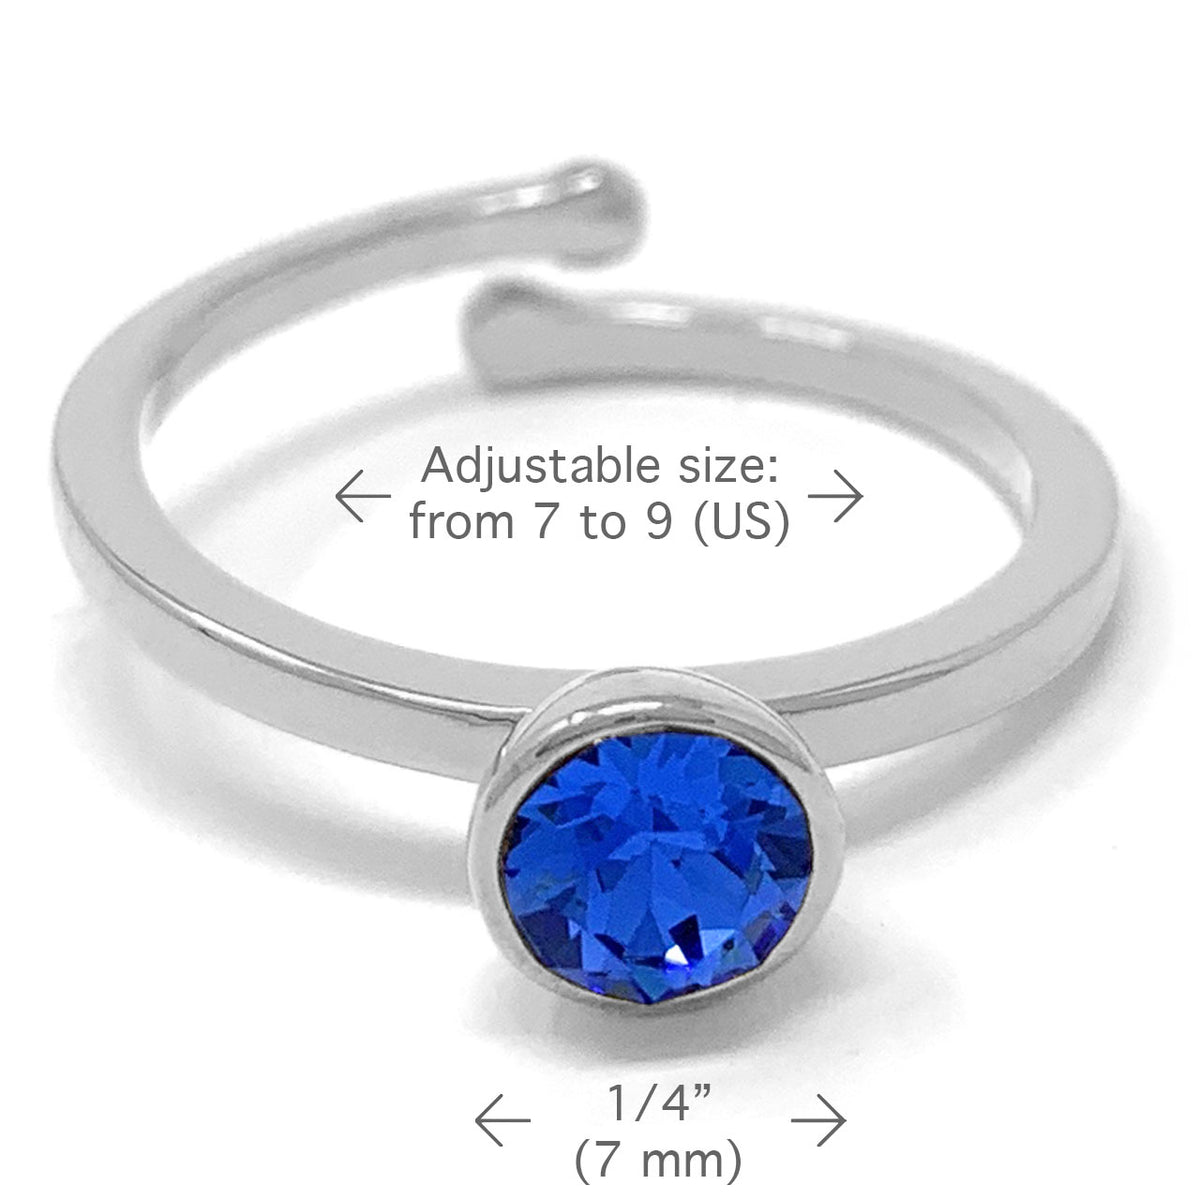 Harley Adjustable Ring with Blue Sapphire Round Crystals from Swarovski Silver Toned Rhodium Plated - Ed Heart